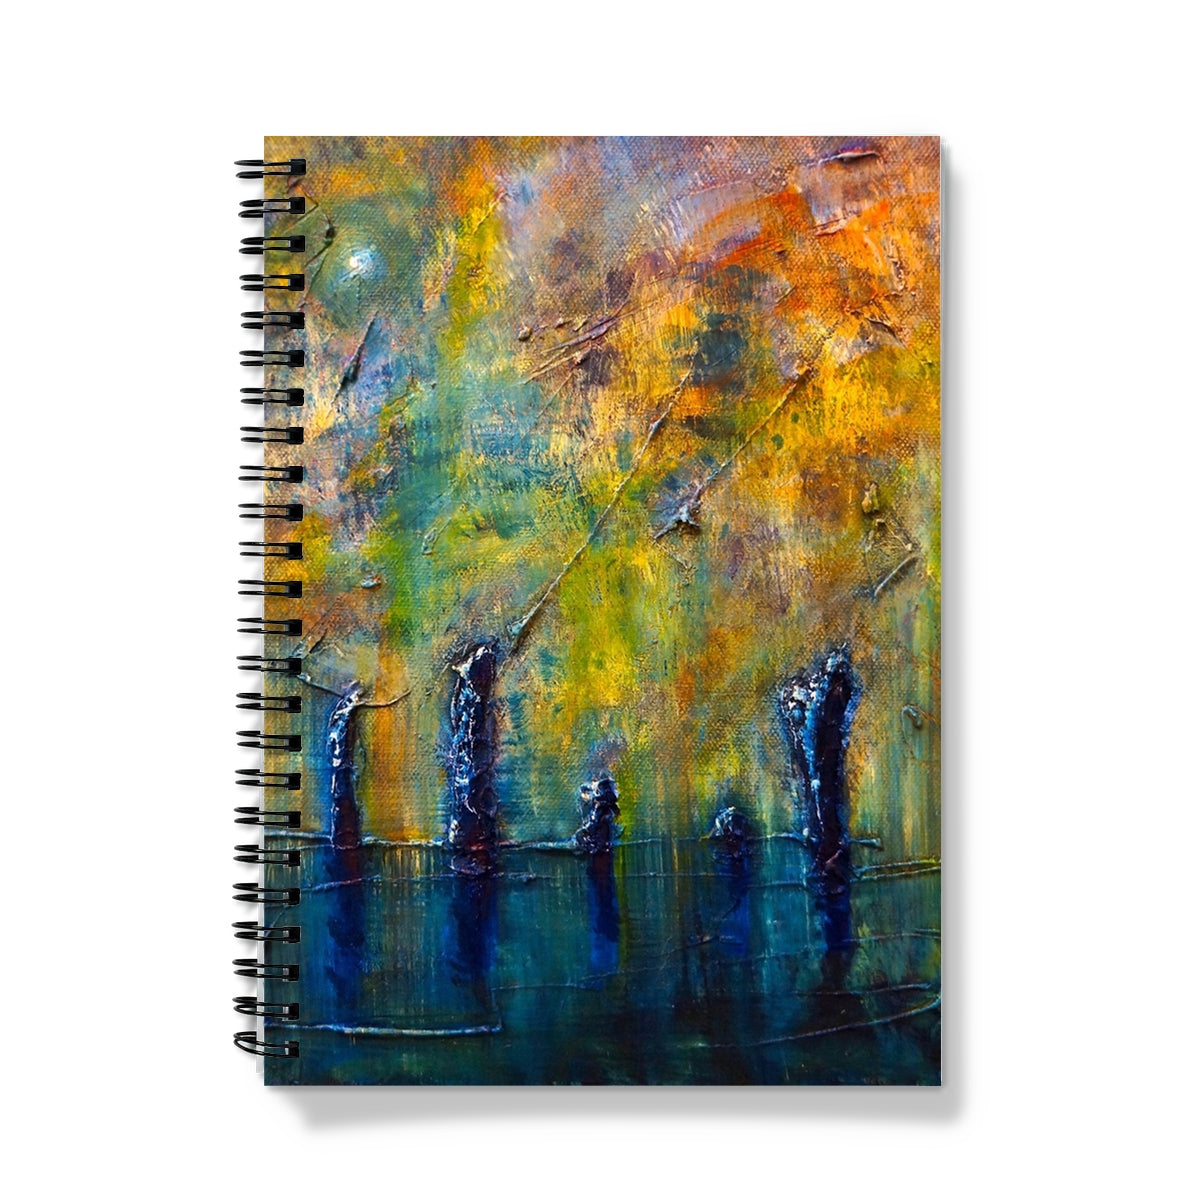 Stenness Moonlight Orkney Art Gifts Notebook-Journals & Notebooks-Orkney Art Gallery-A4-Lined-Paintings, Prints, Homeware, Art Gifts From Scotland By Scottish Artist Kevin Hunter